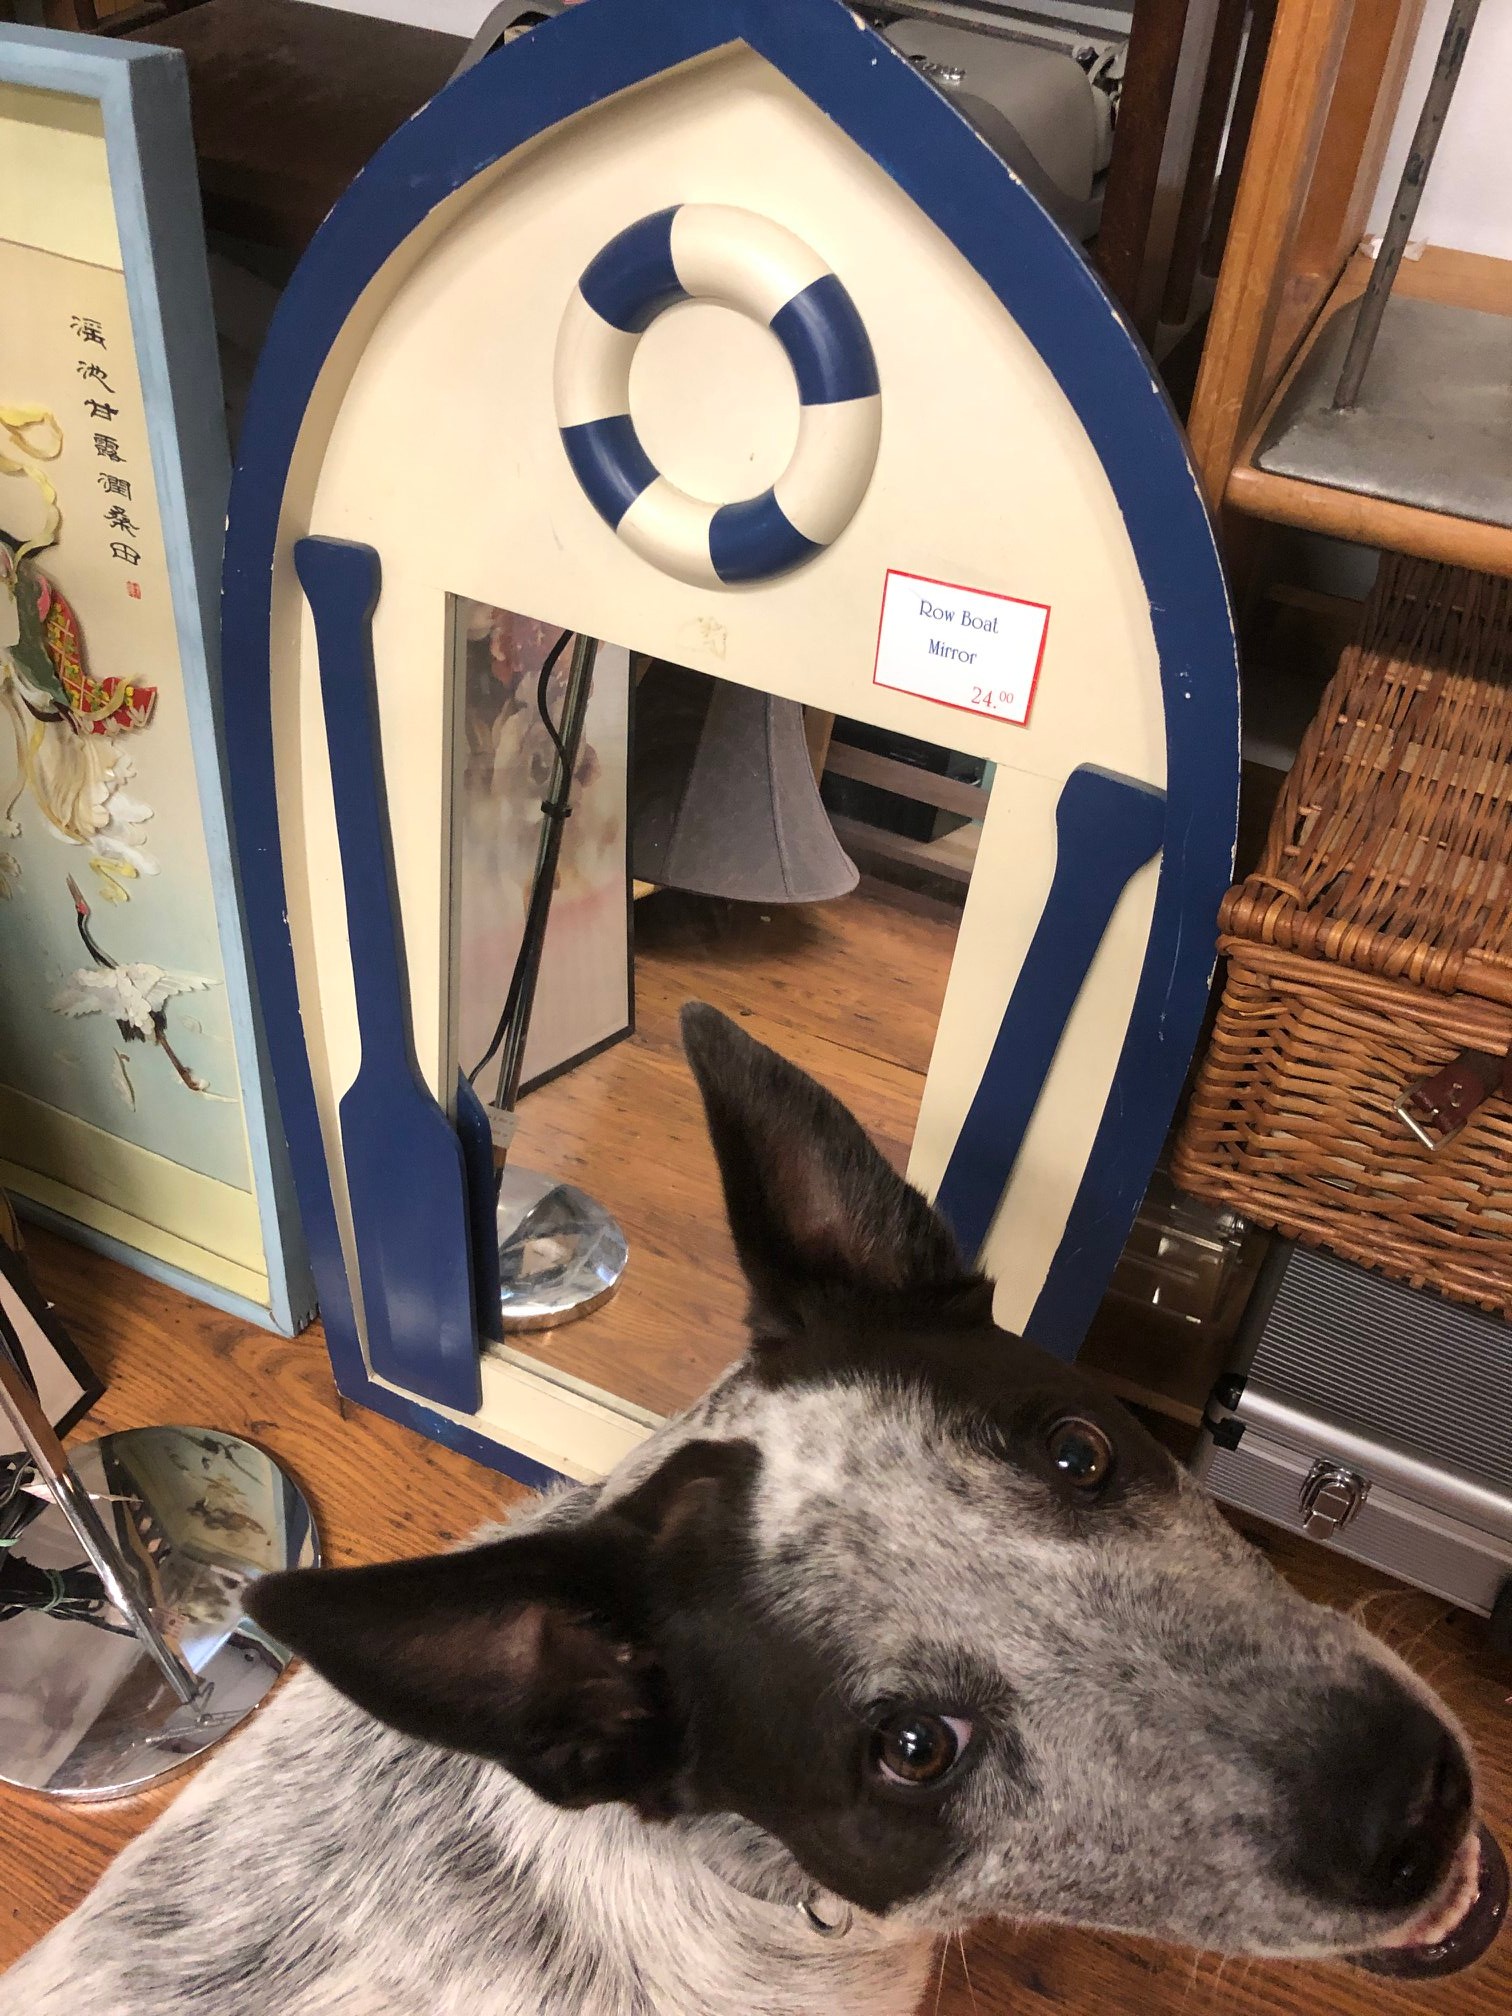 Scranberry Snapshot - Did you see that beautiful dog in the mirror? - Scranberry Coop - Vintage Store - Antiques, Collectibles, & More